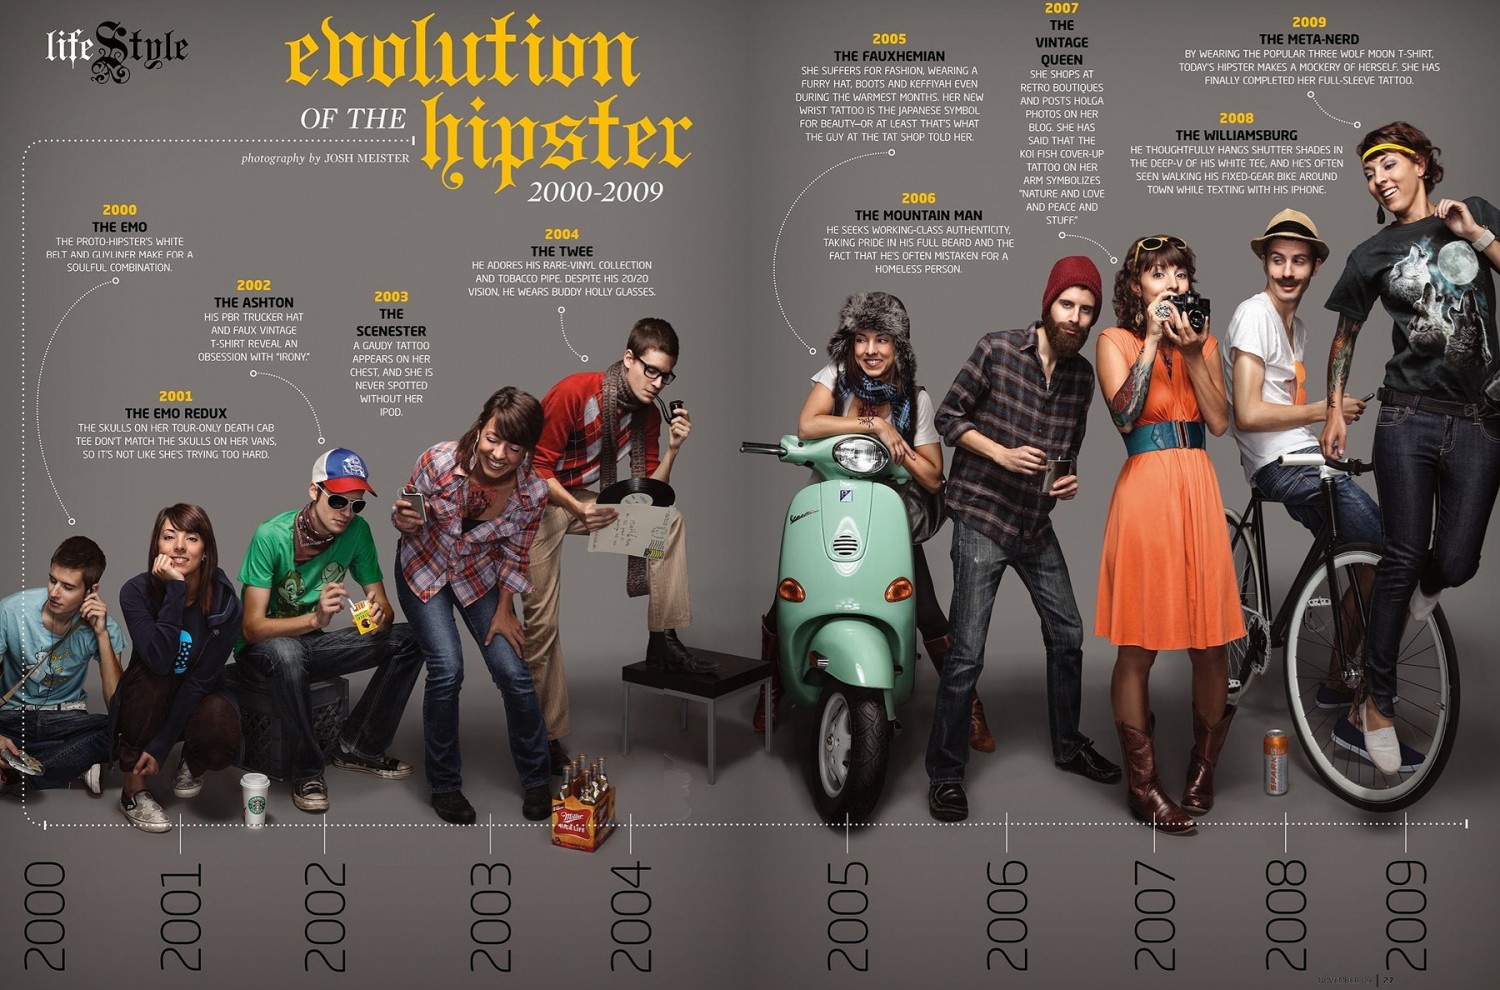 Evolution of the Hipster 2000-2009